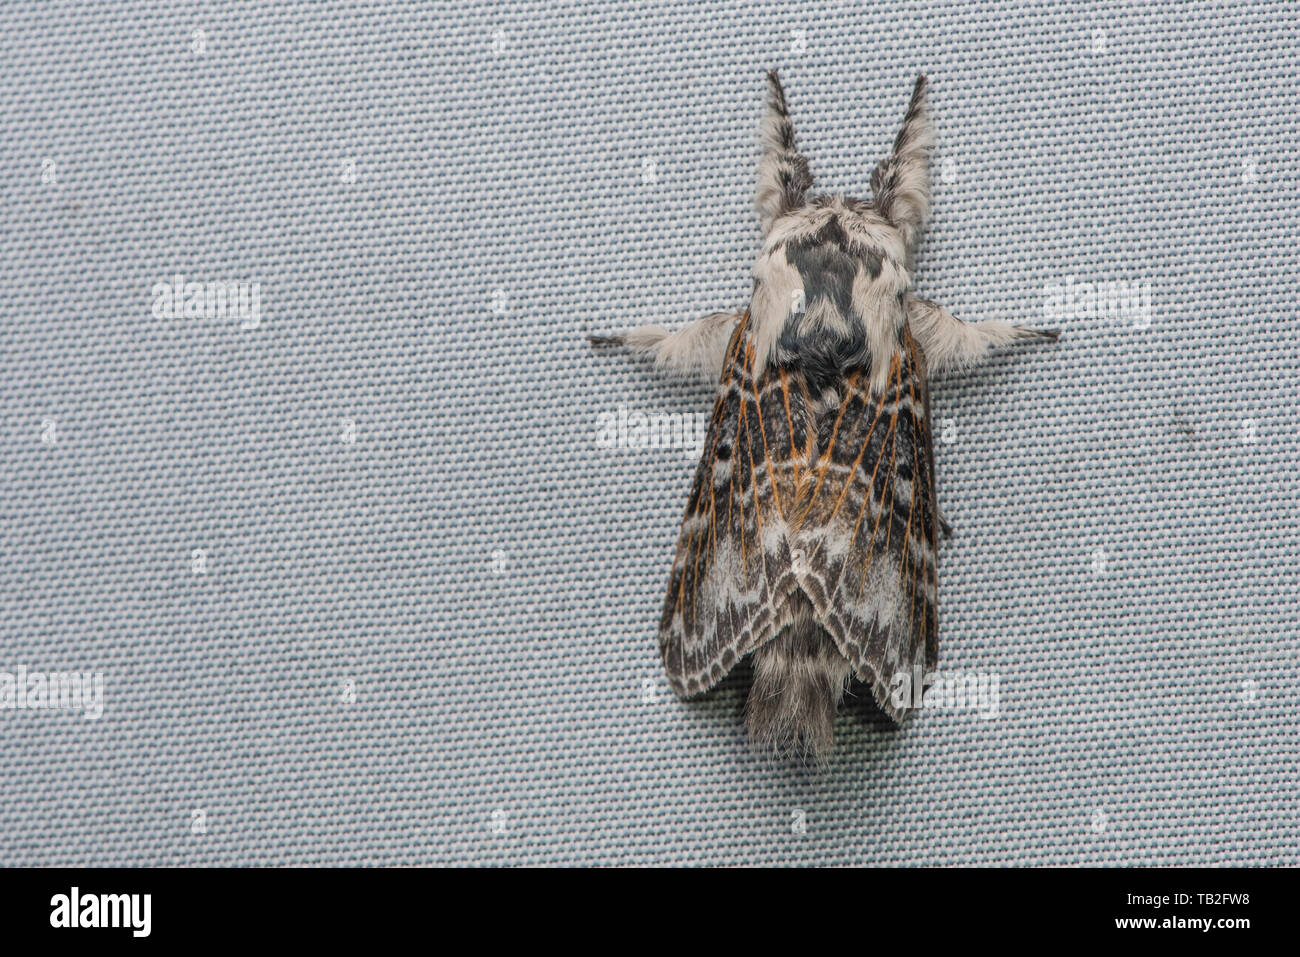 Prominent Moth, Family Notodontidae from the Ecuadorian cloud forest in South America Stock Photo